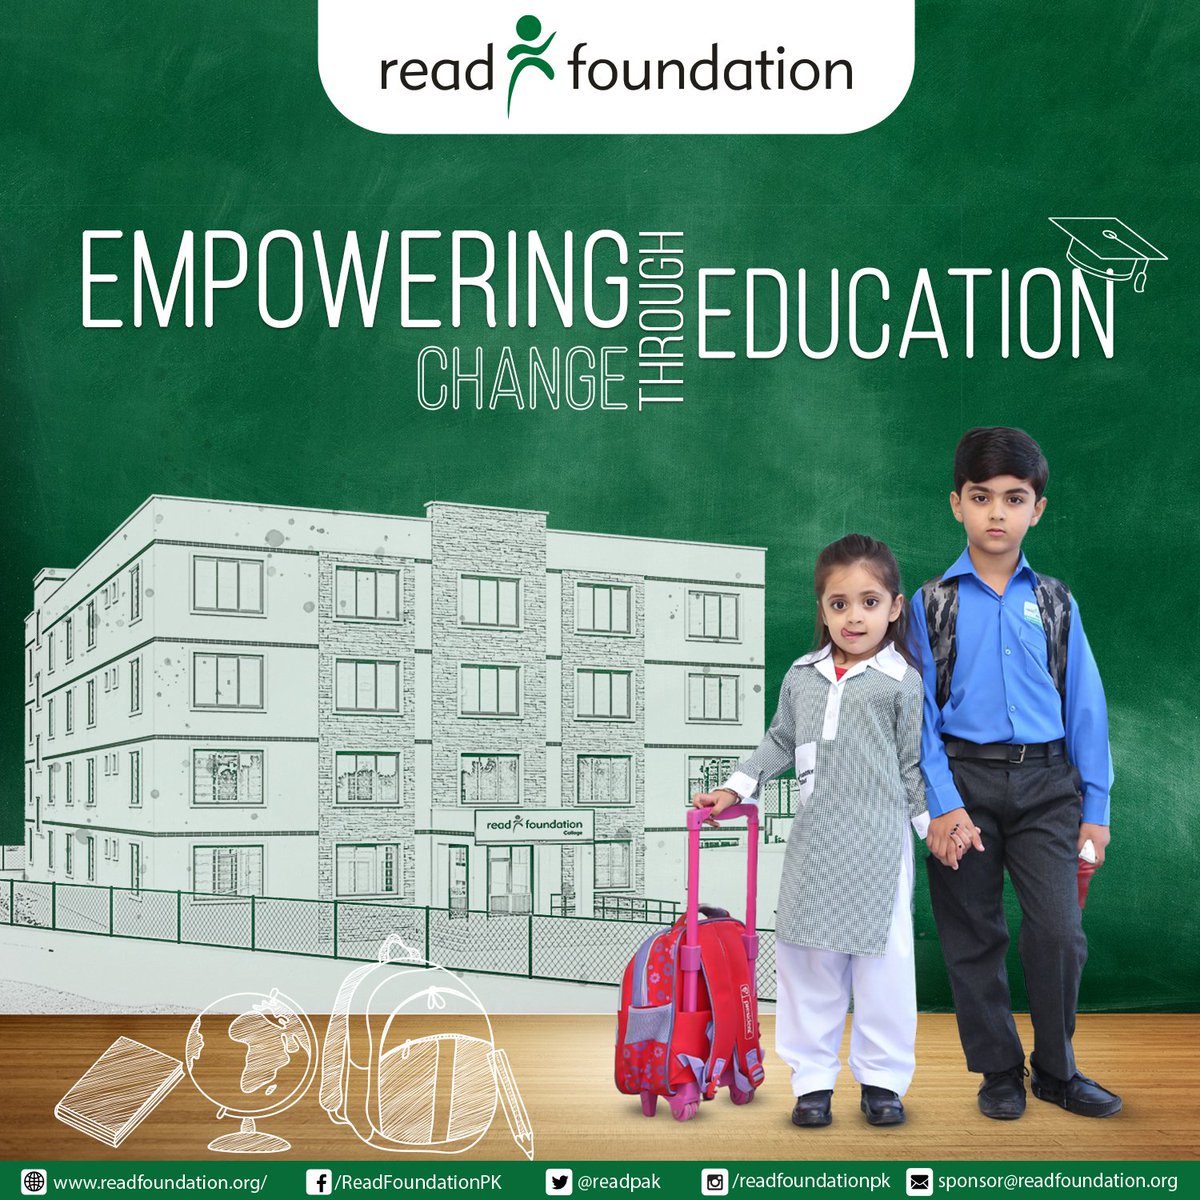 Education is the key to empowering change, fostering growth, and shaping a bright future for all. Let's support education to contribute to the betterment of society. #READFoundation #education #society #empowerment